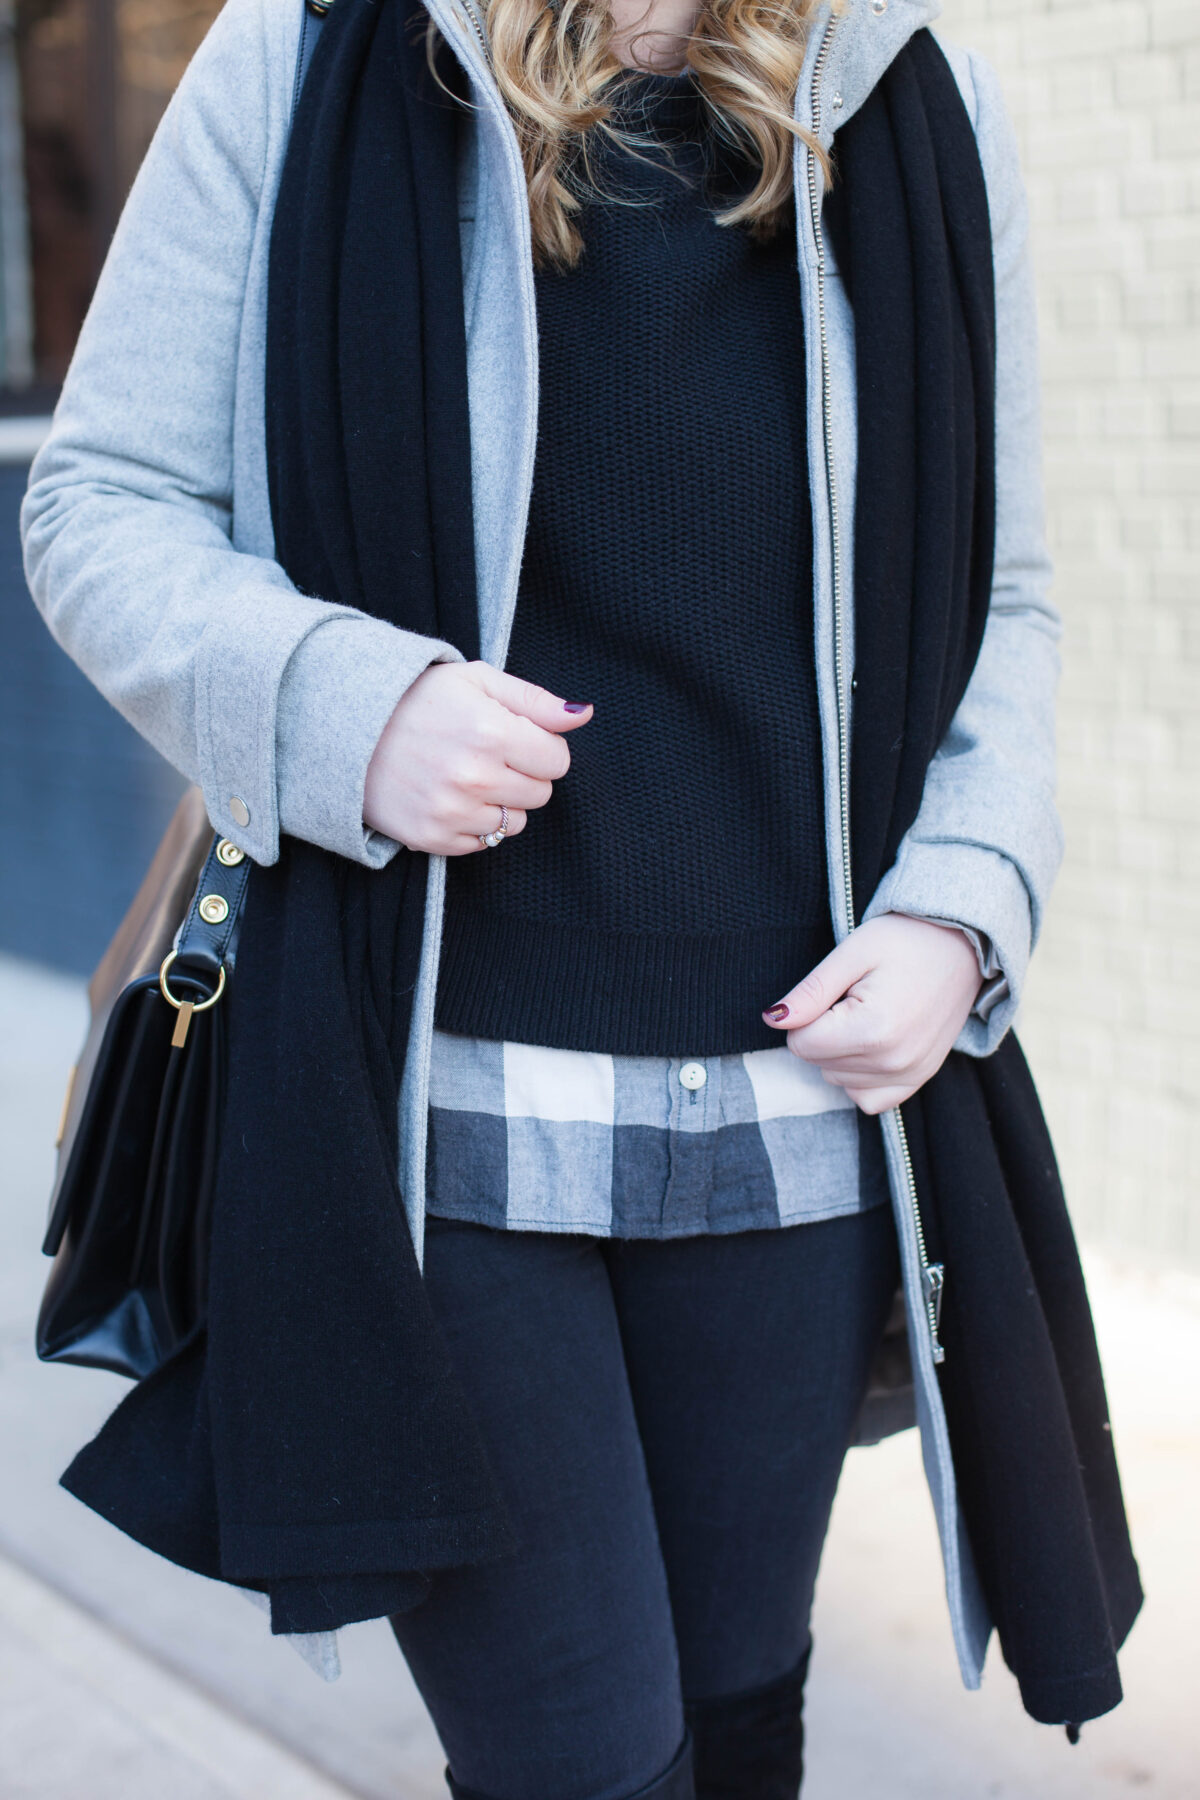 Layered in Black and Gray